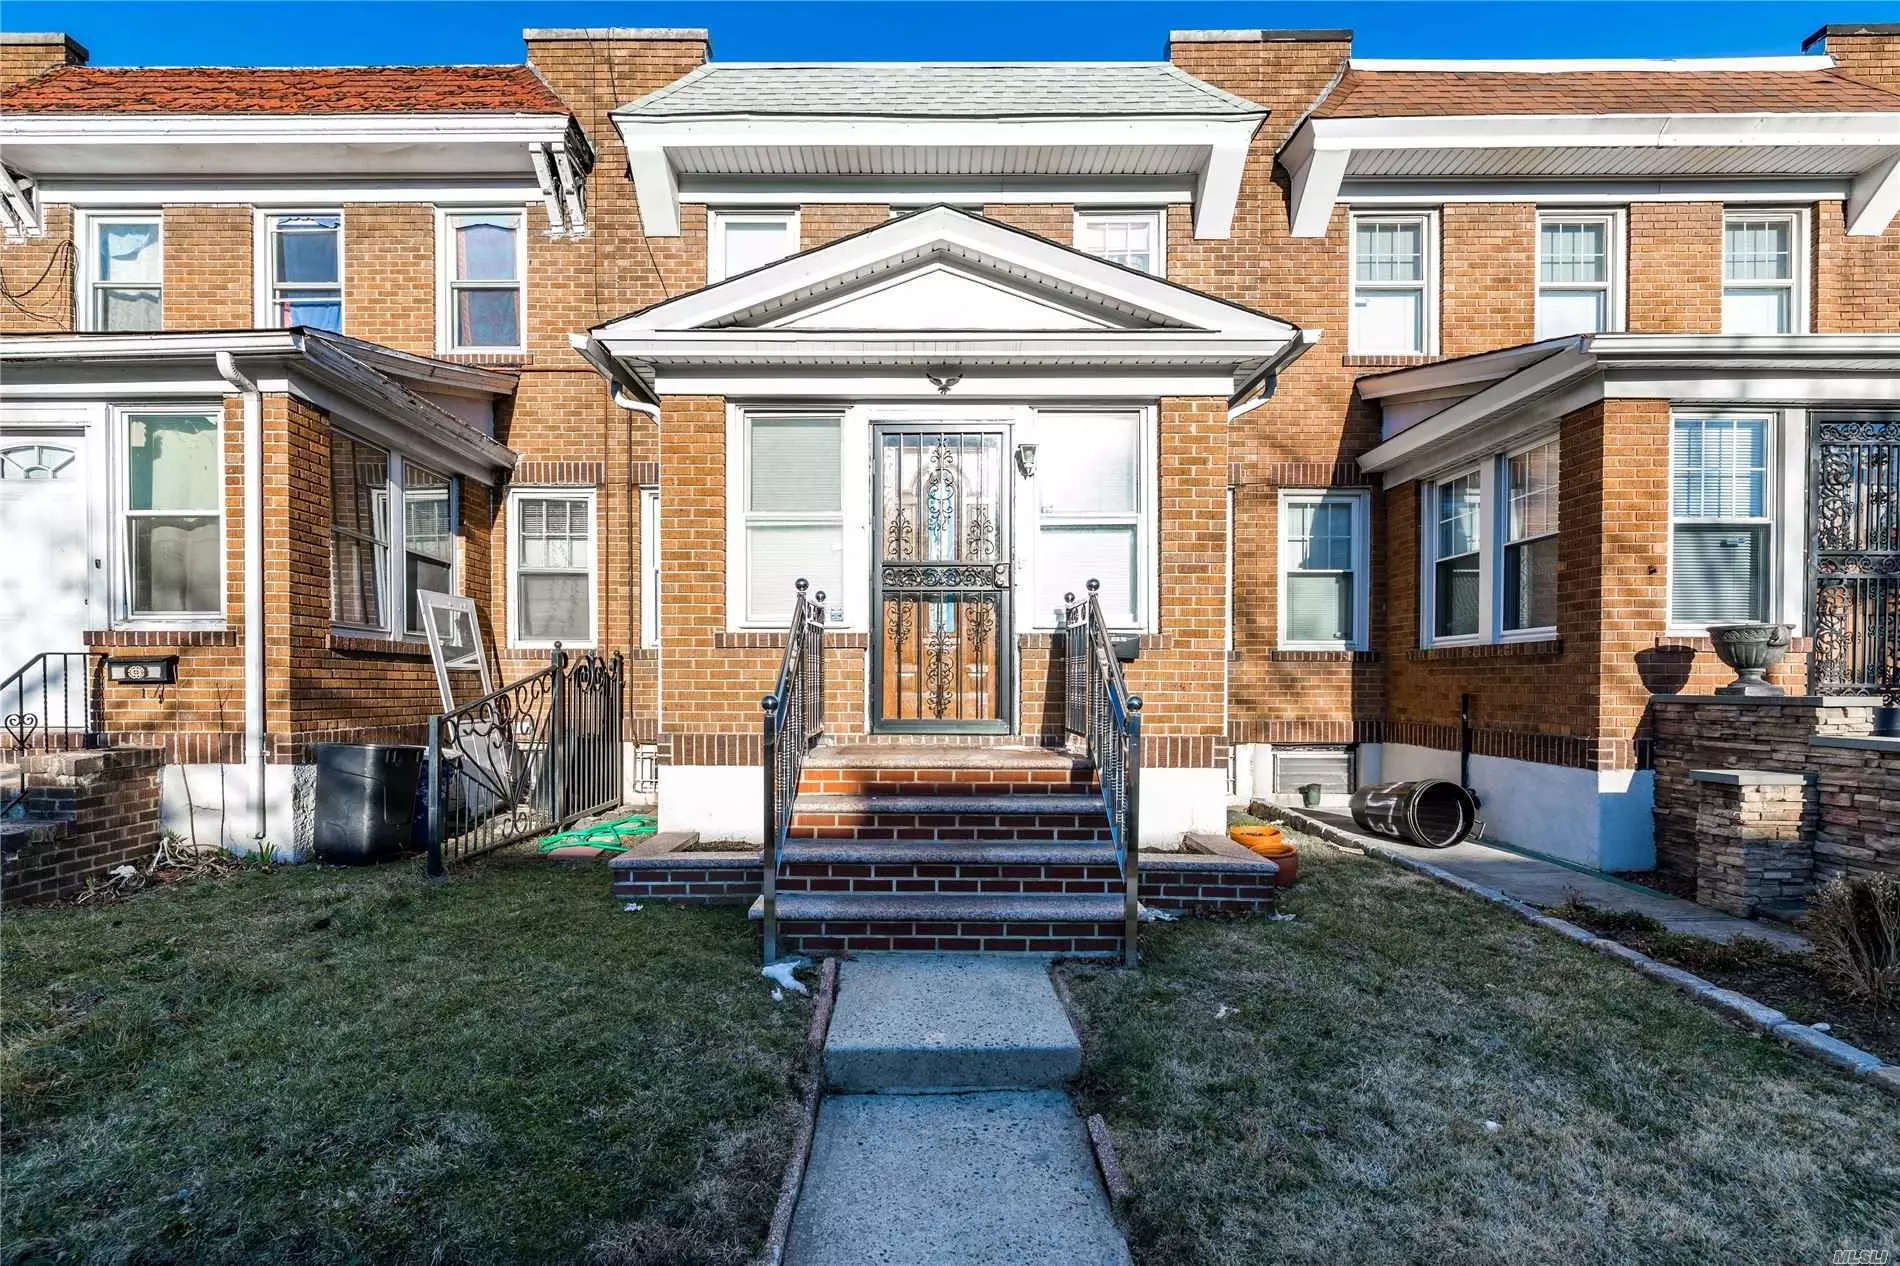 1 Family Attached Brick Colonial. 3 Bedrooms, 1.5 Baths, Living Room, Formal Dining Room, Eat-In Kitchen, OSE AT The Rear. Brand New Boiler Just Converted From Oil. Finish Basement. Parking In The Rear